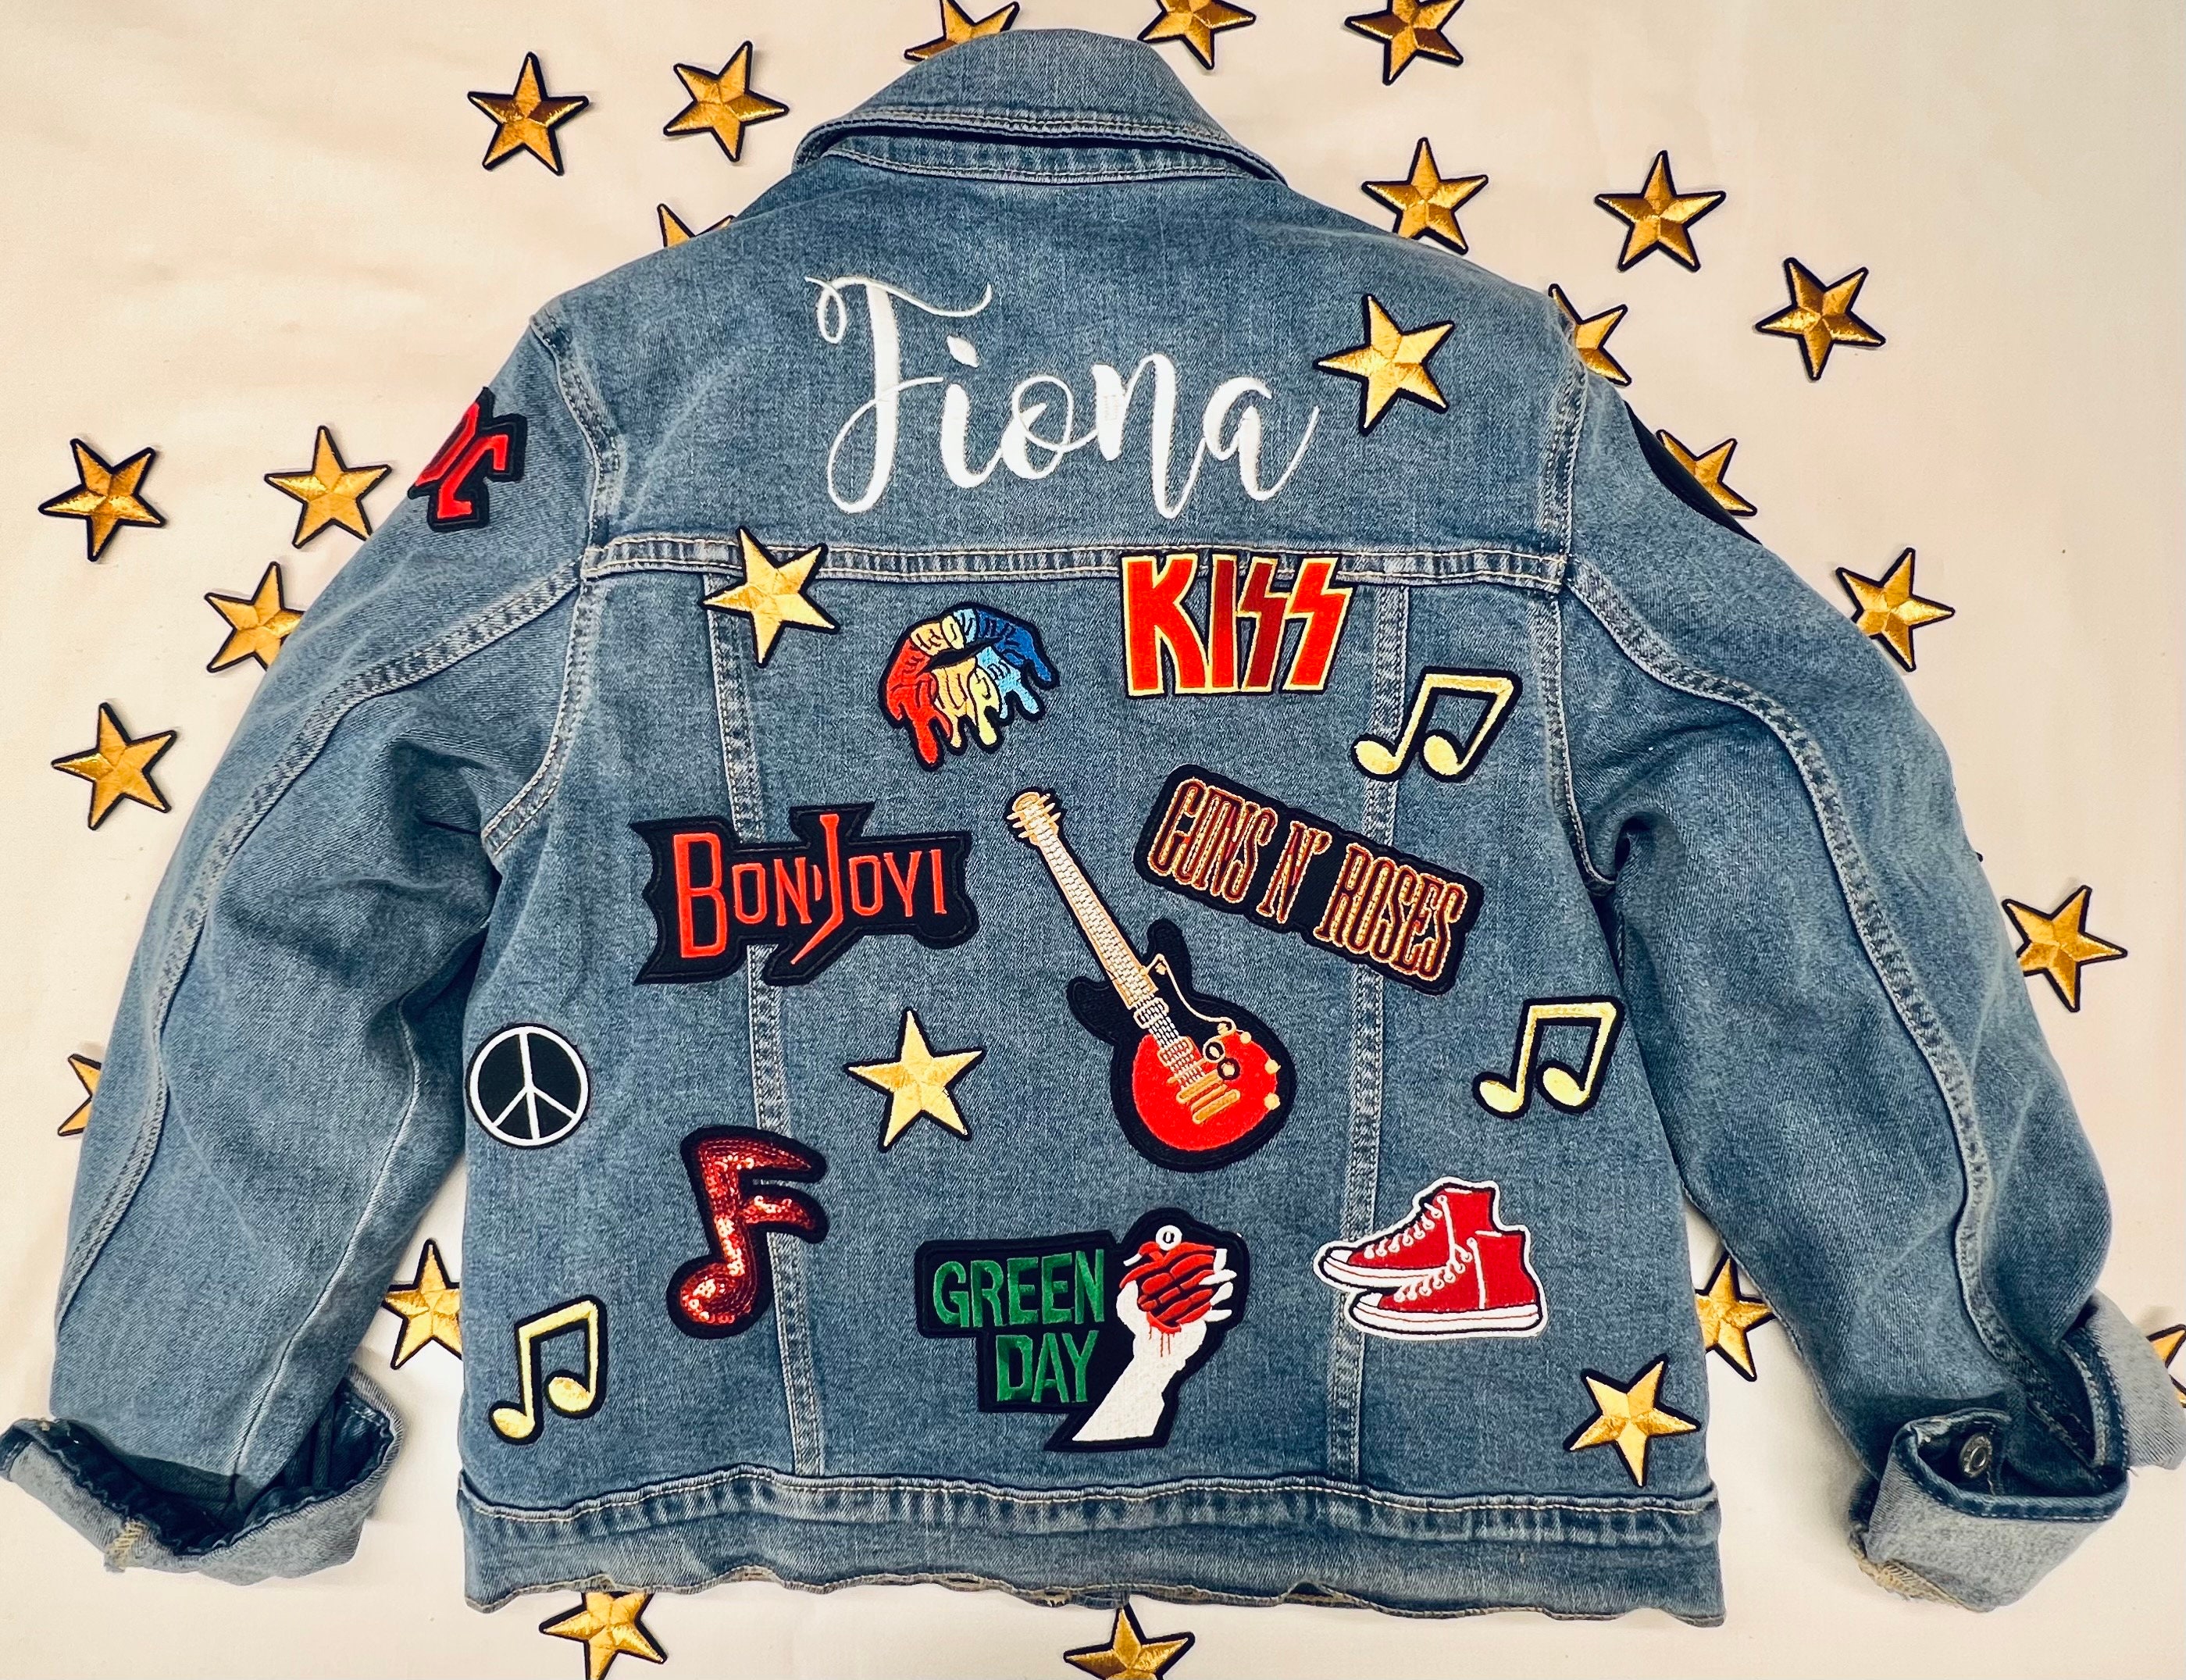 rosecutclothing made these amazing jackets with custom patches on